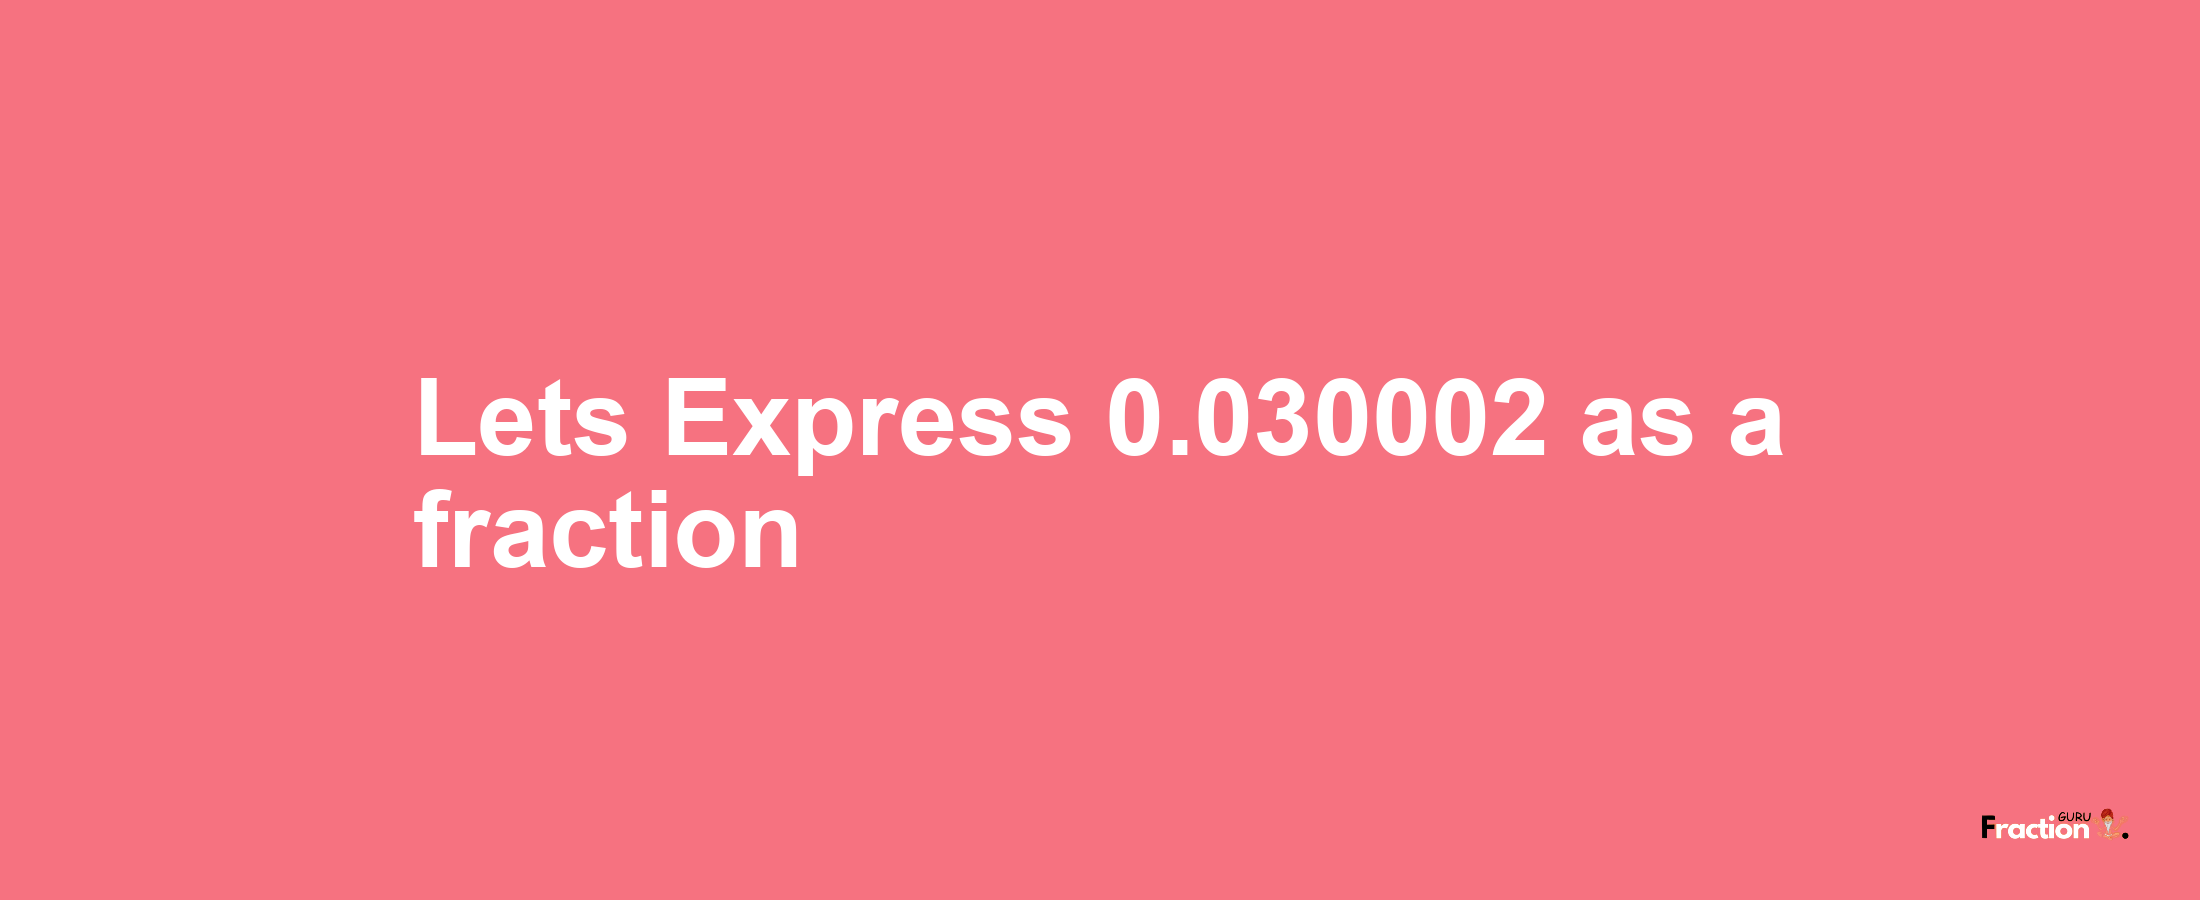 Lets Express 0.030002 as afraction